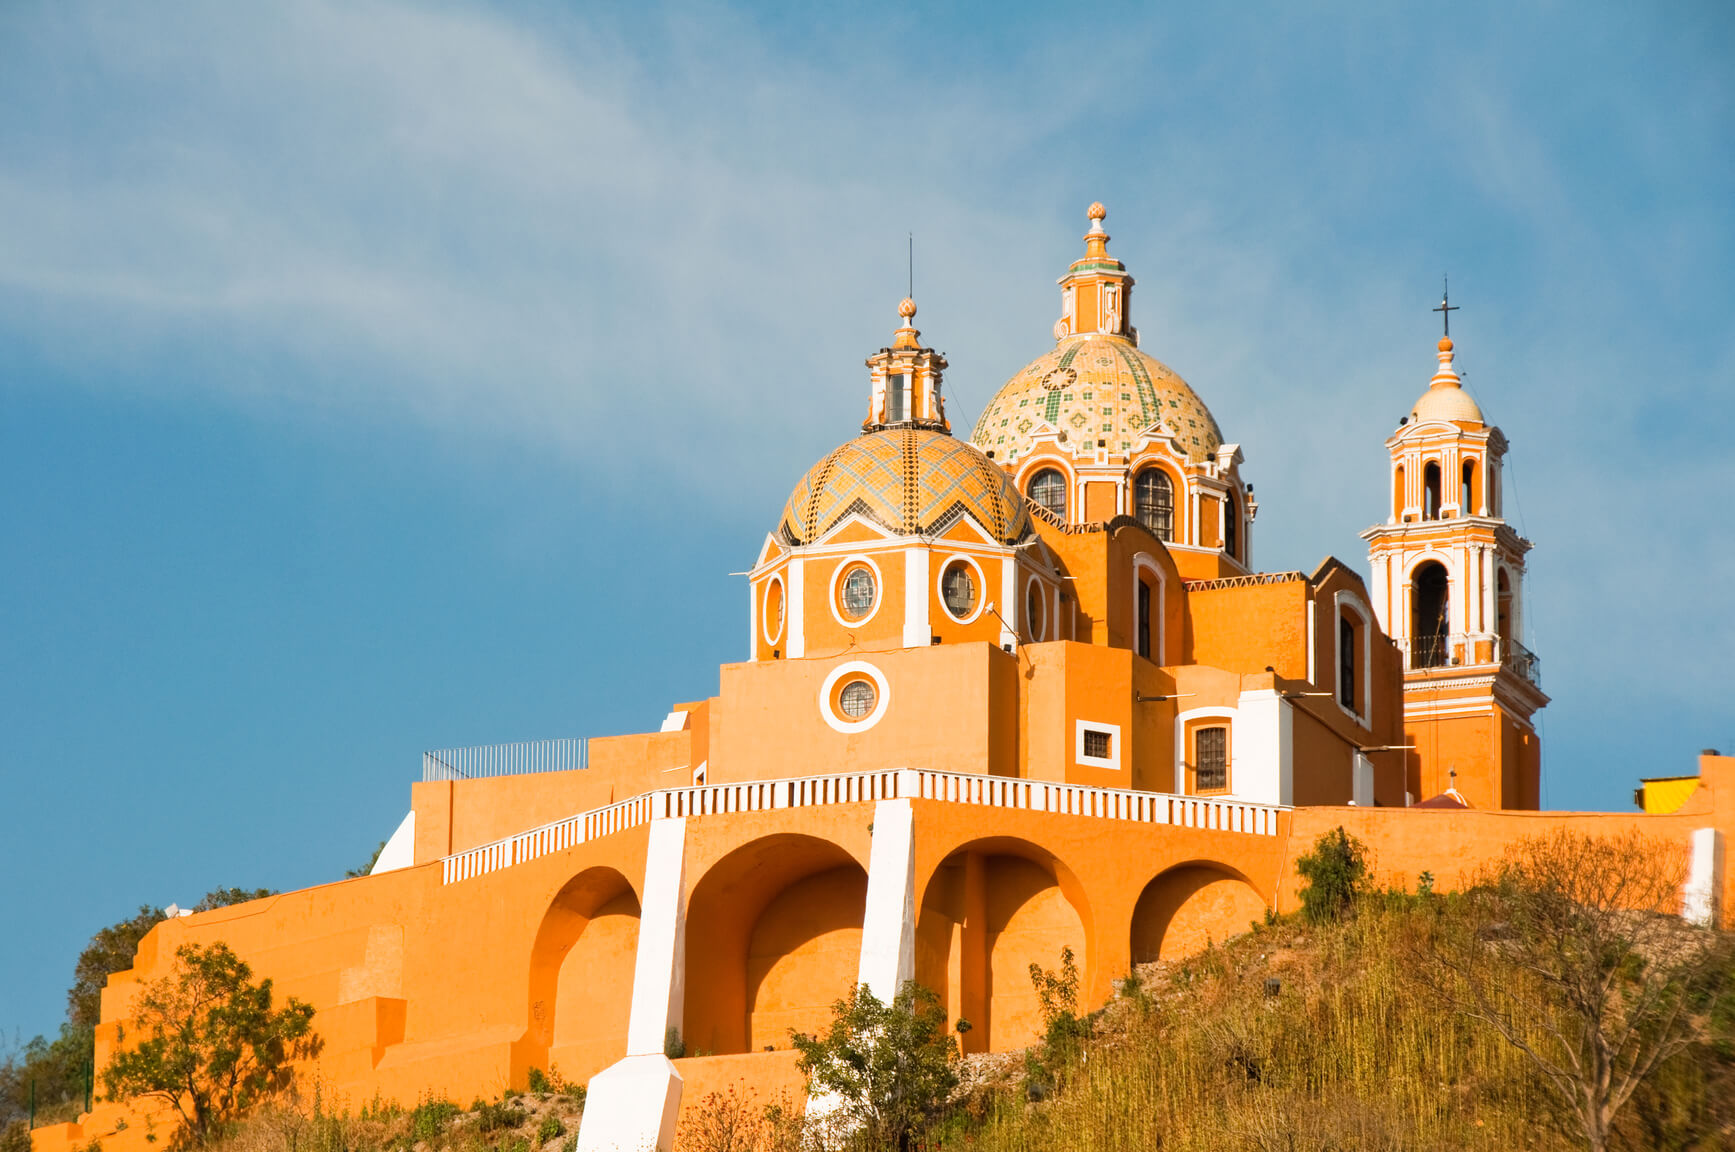 Flight deals from US cities to Puebla, Mexico | Secret Flying